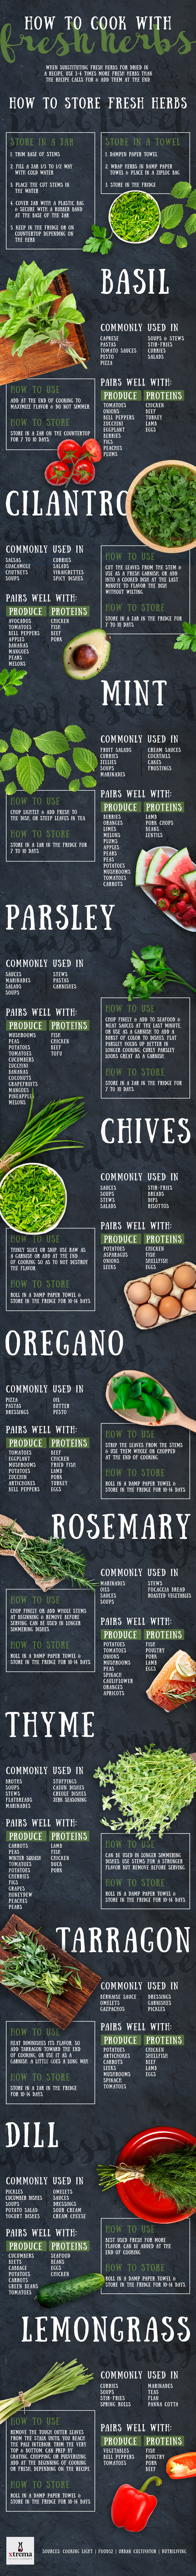 Cooking with Herbs infographic by Ceramcor